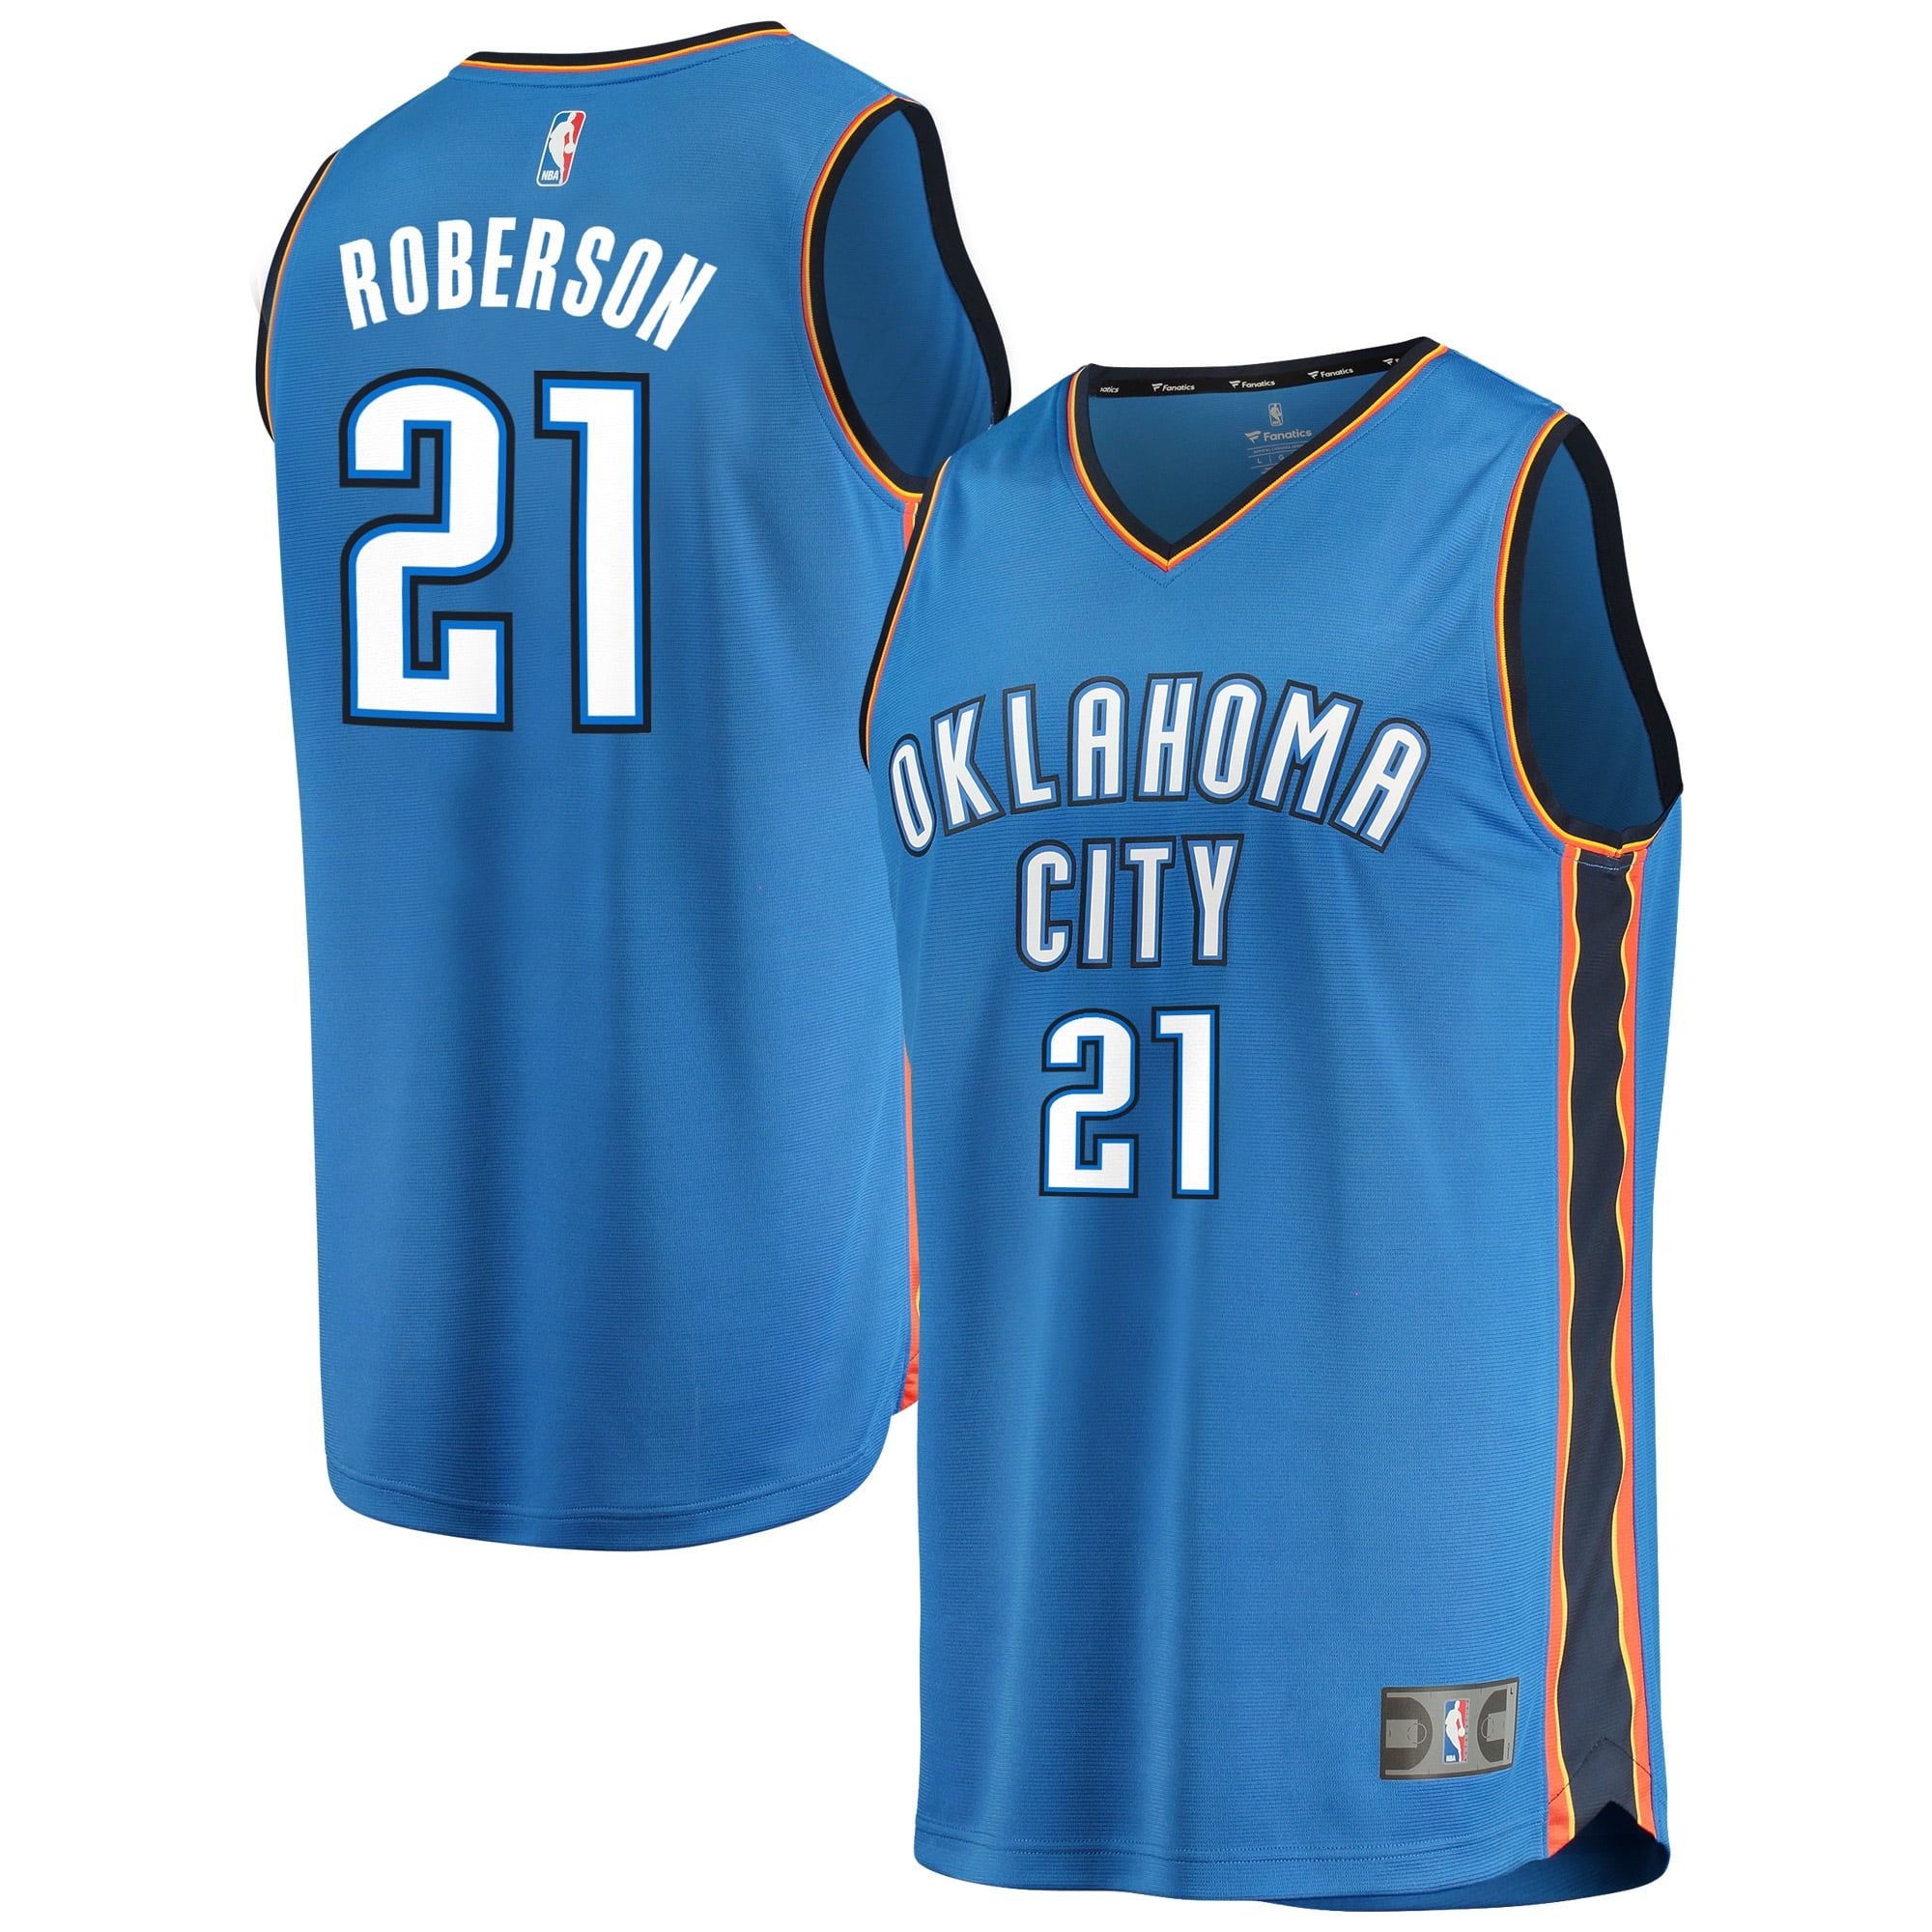 andre roberson jersey